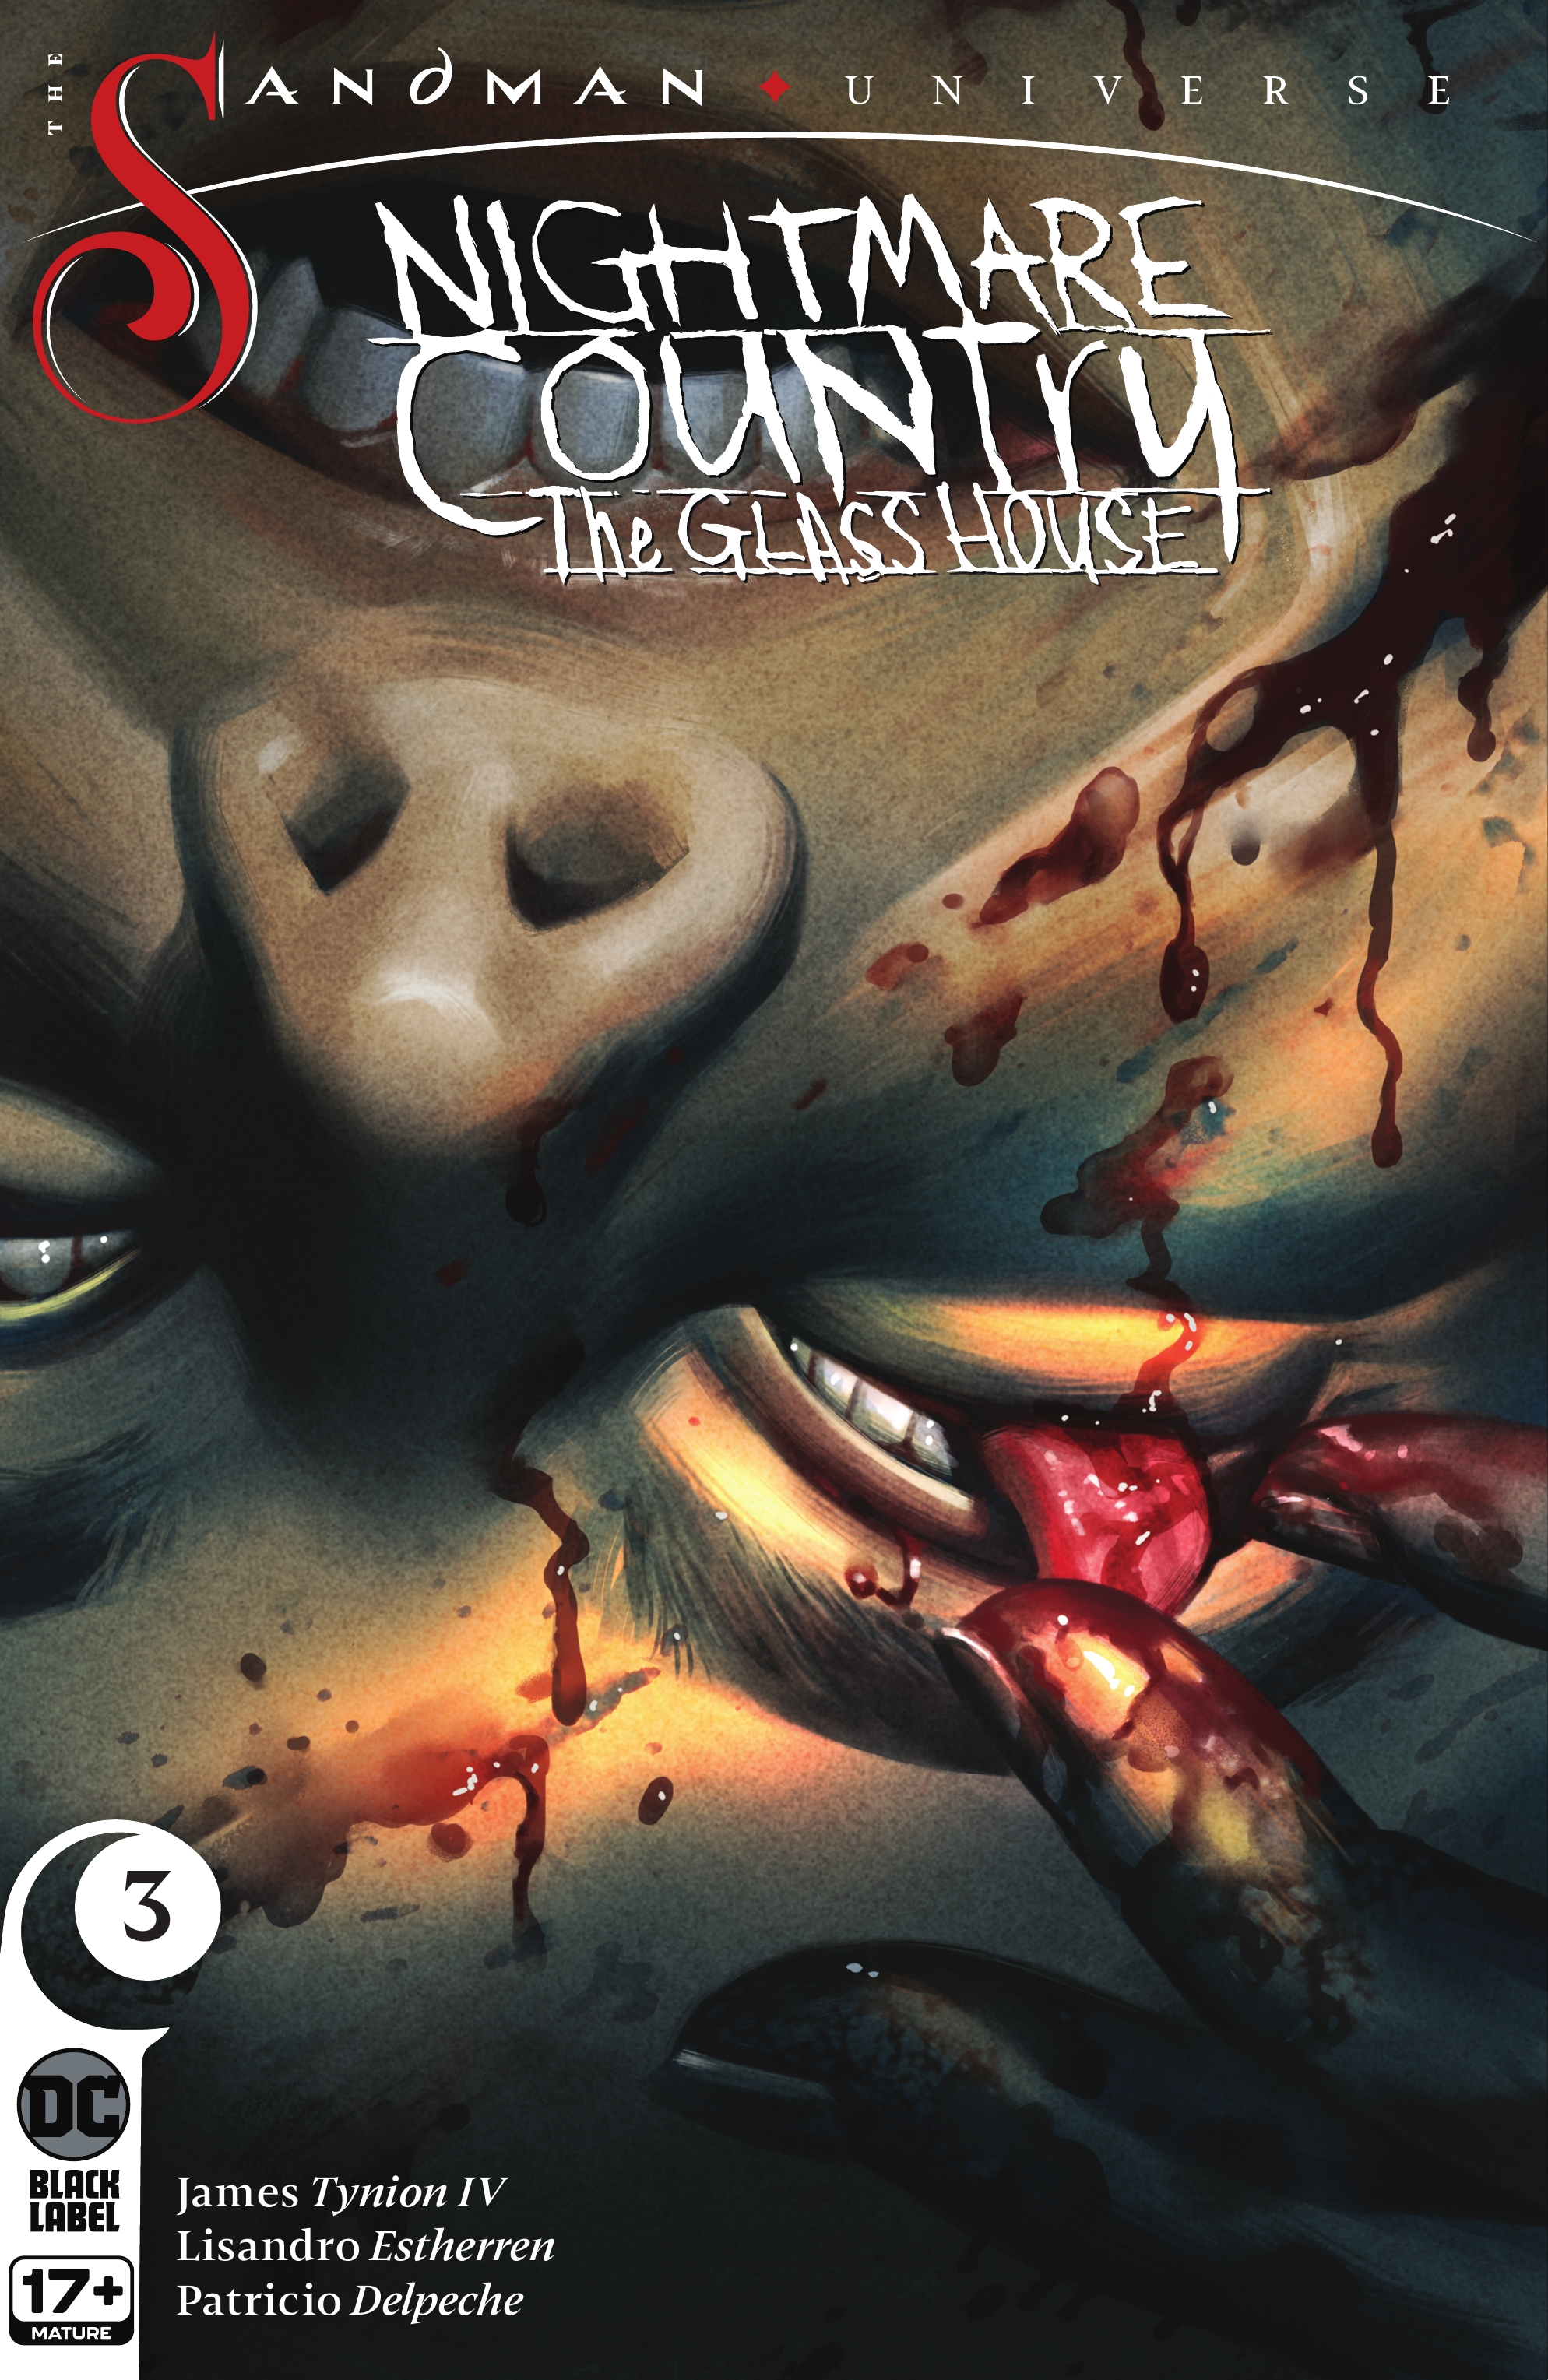 Read online Nightmare Country - The Glass House comic -  Issue #3 - 1